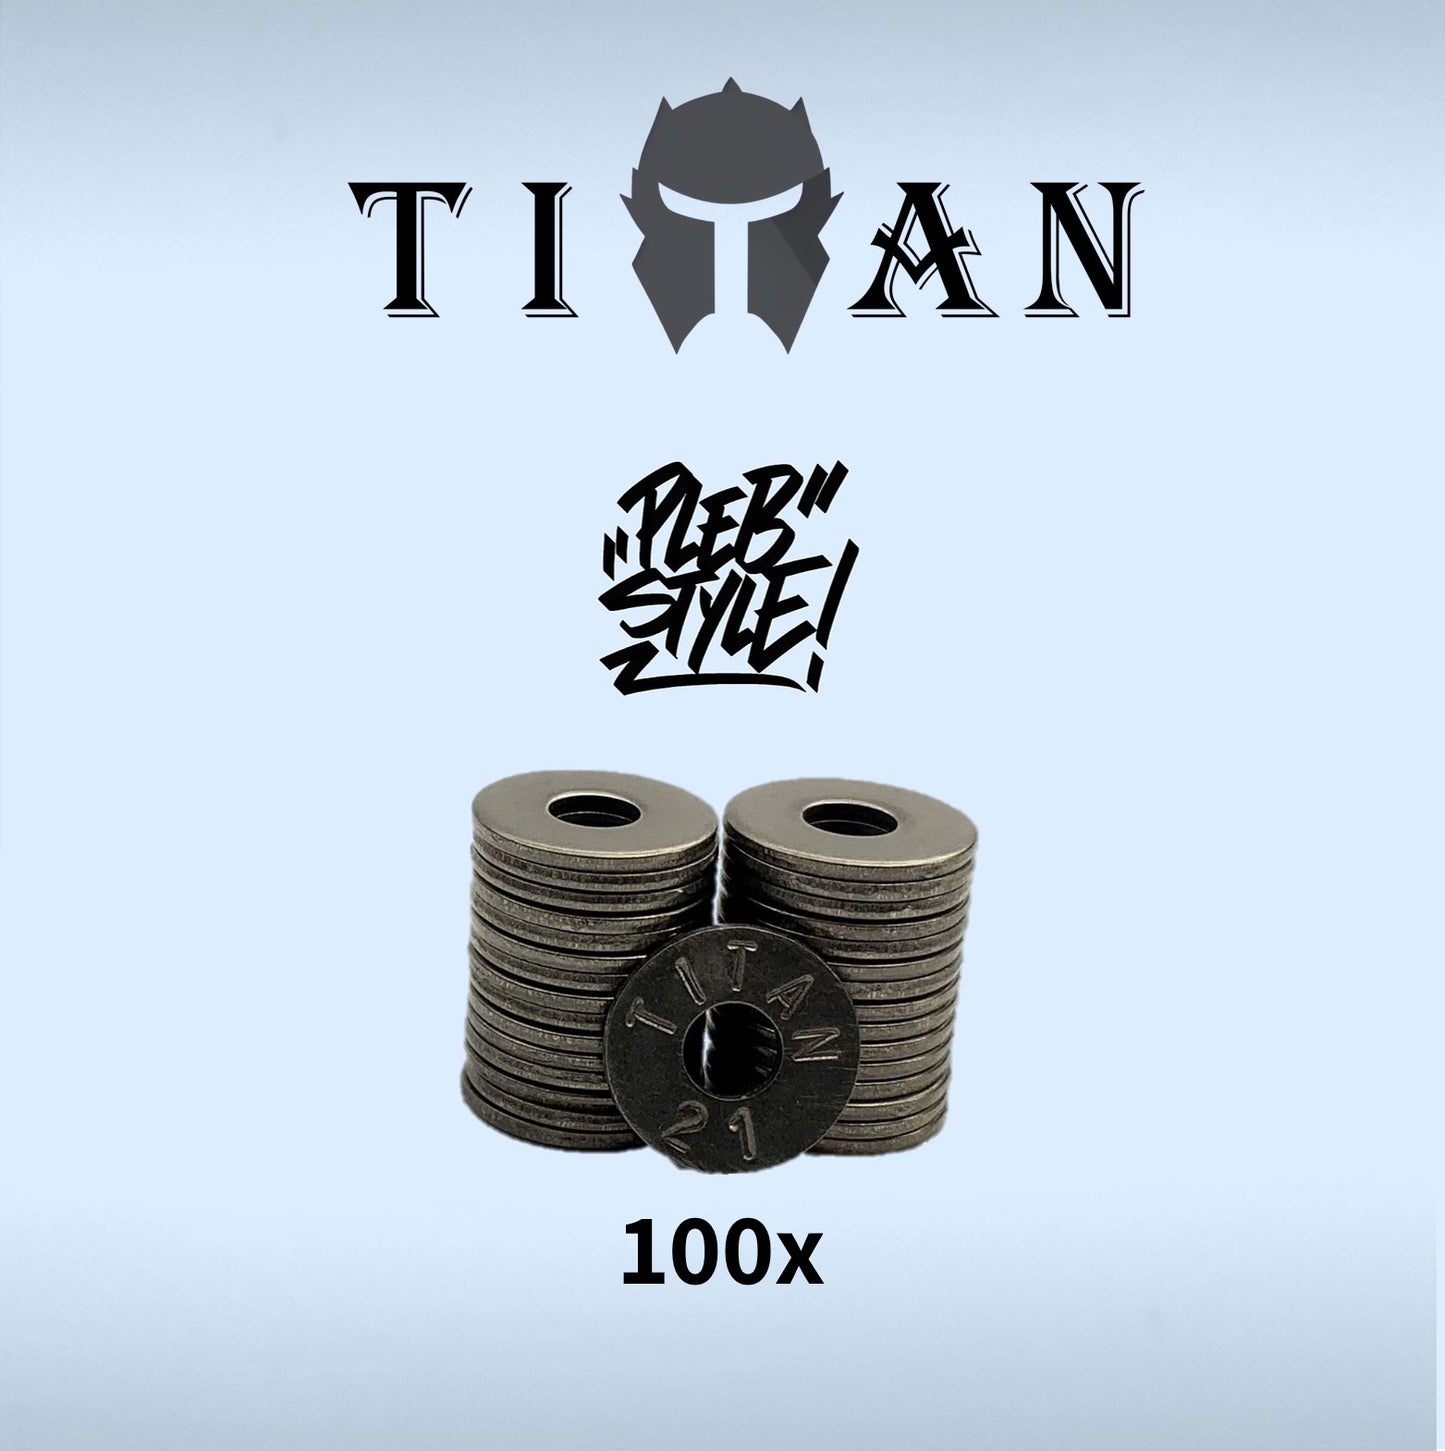 100x Seed Discs for Titan Wallet by Plebstyle